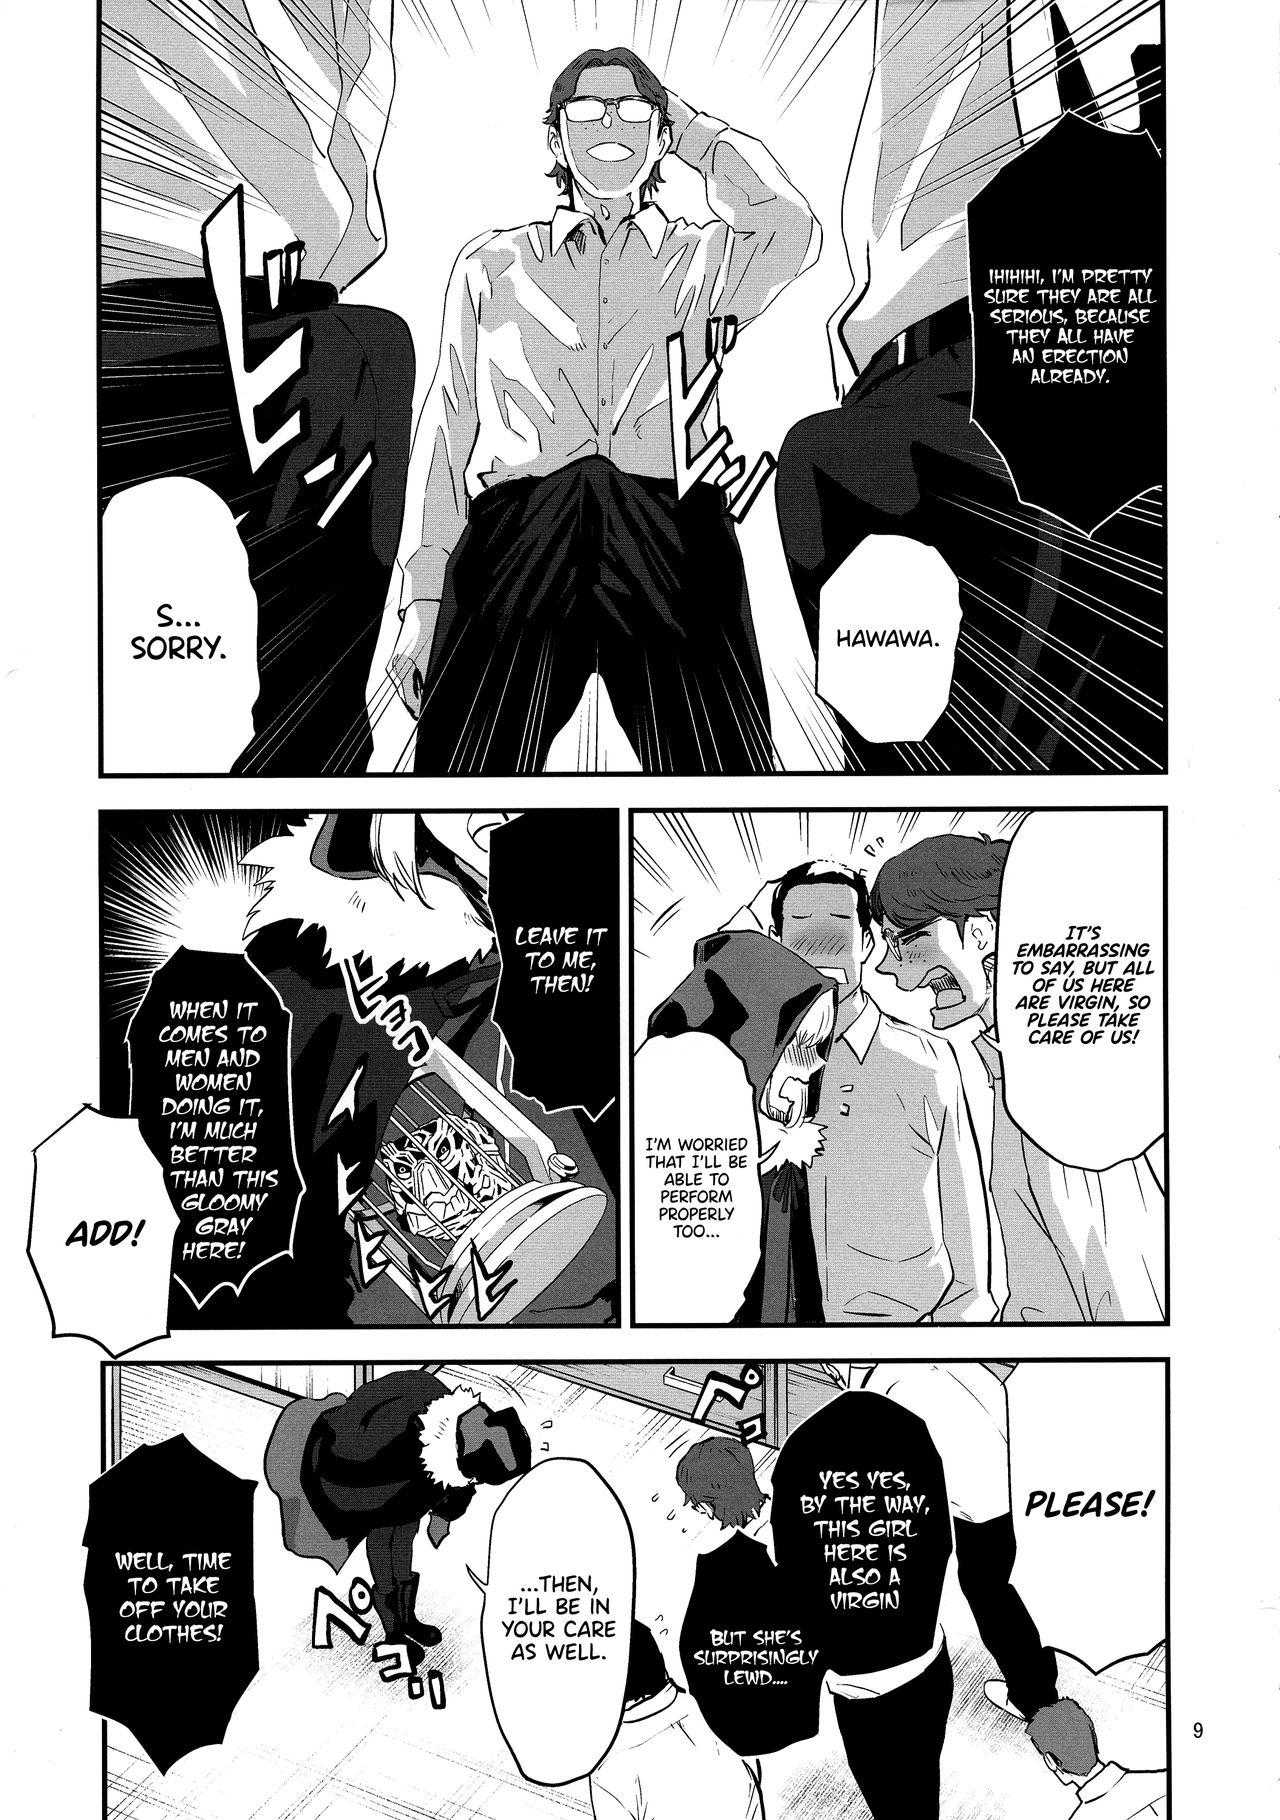 Hardcore Sex Taking Advantage of Gray-chan Weakness, We Graduated from our Virginity. - Lord el-melloi ii sei no jikenbo Trans - Page 9